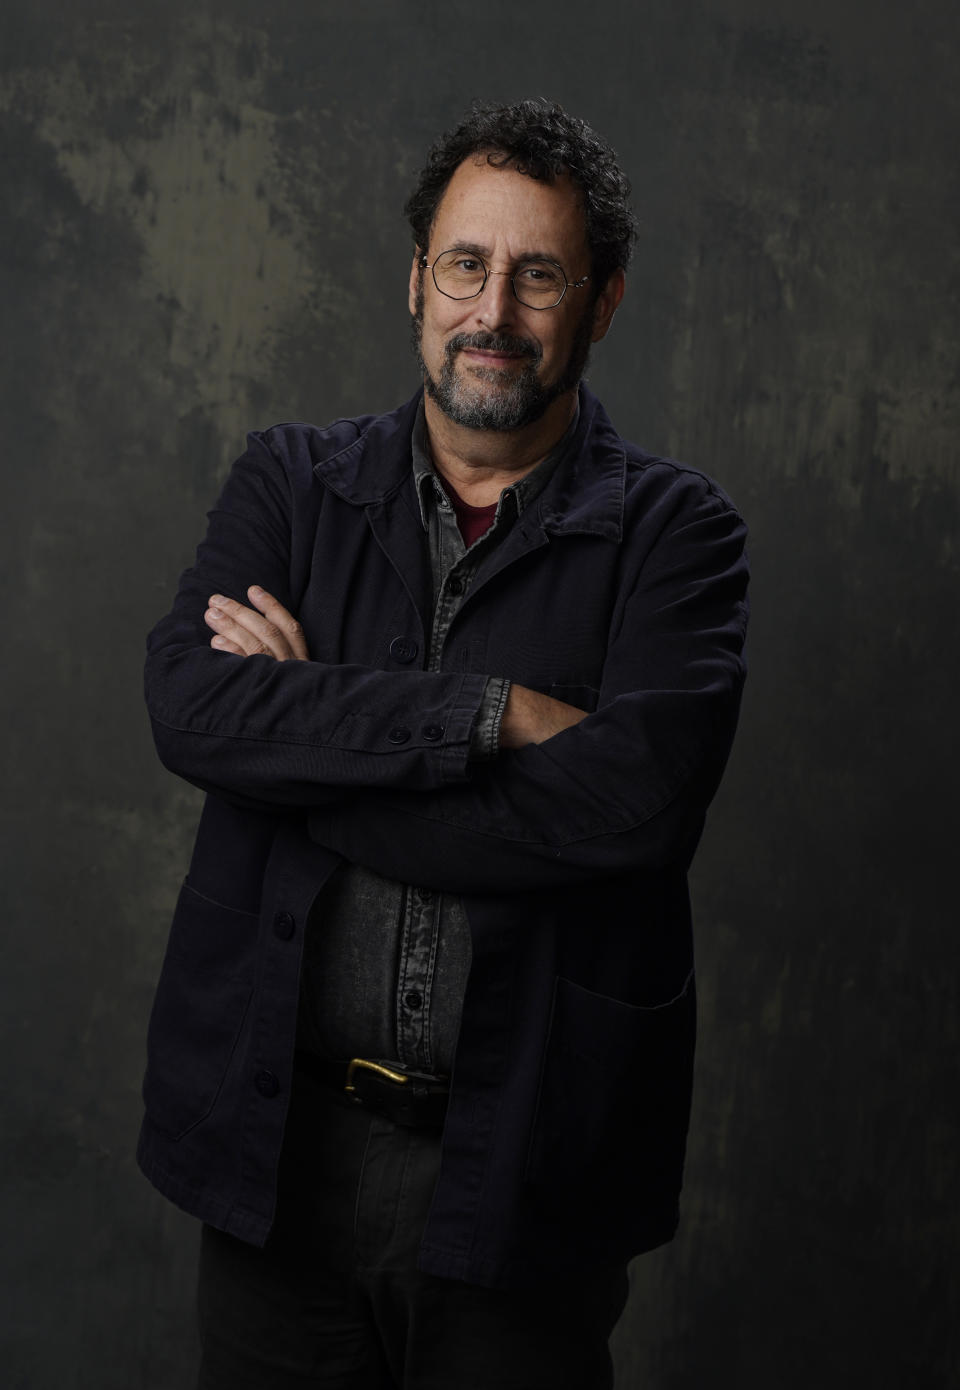 Tony Kushner, co-writer of the film "The Fabelmans," poses for a portrait at the Four Seasons Hotel, Monday, Nov. 7, 2022, in Los Angeles. (AP Photo/Chris Pizzello)